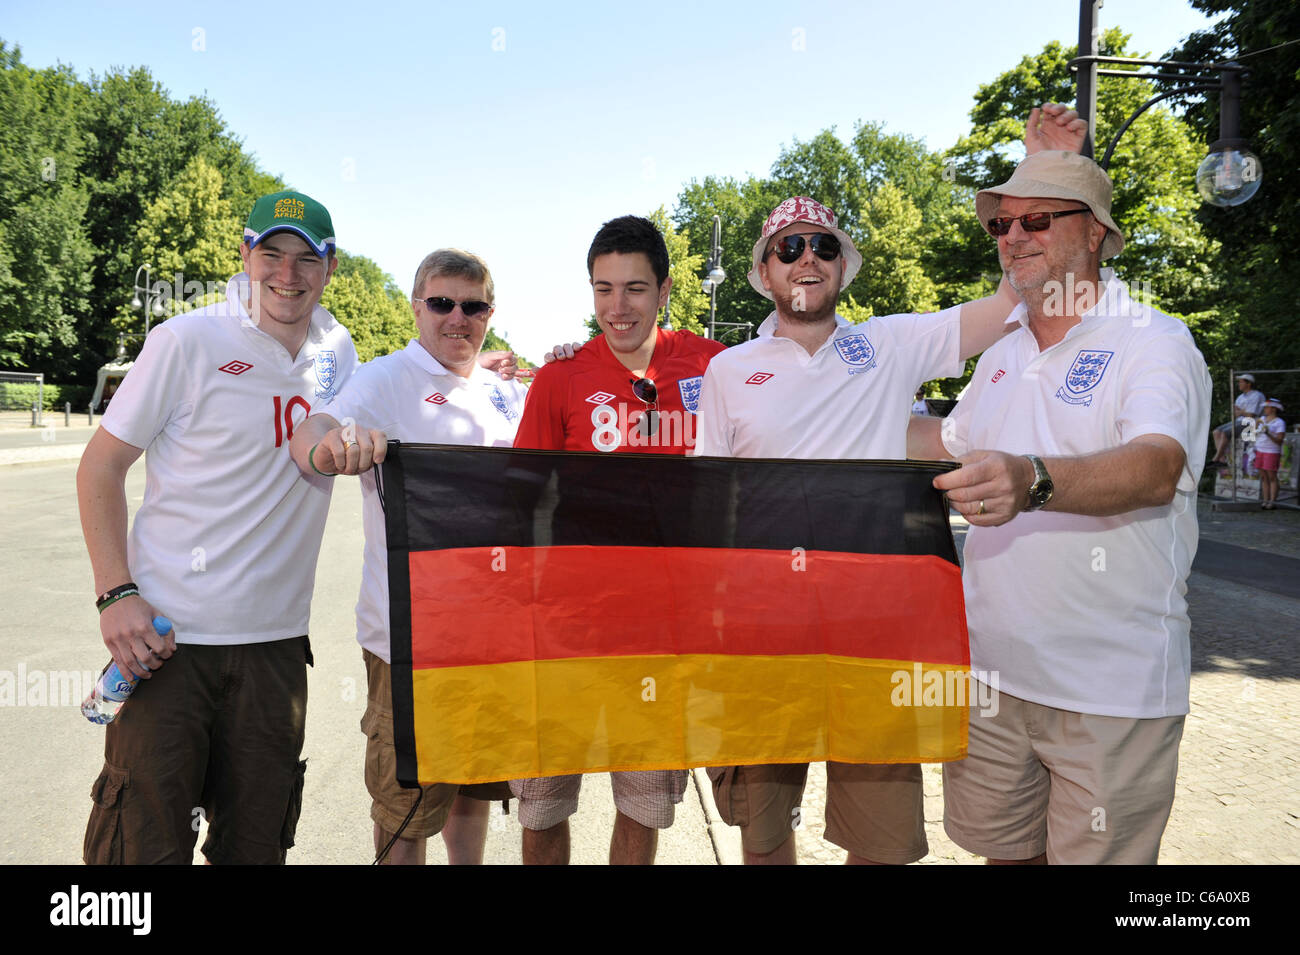 England fans arriving at the International FIFA Fan Fest at the Fanmeile on Strasse des 17. Juni street. Berlin, Germany - Stock Photo